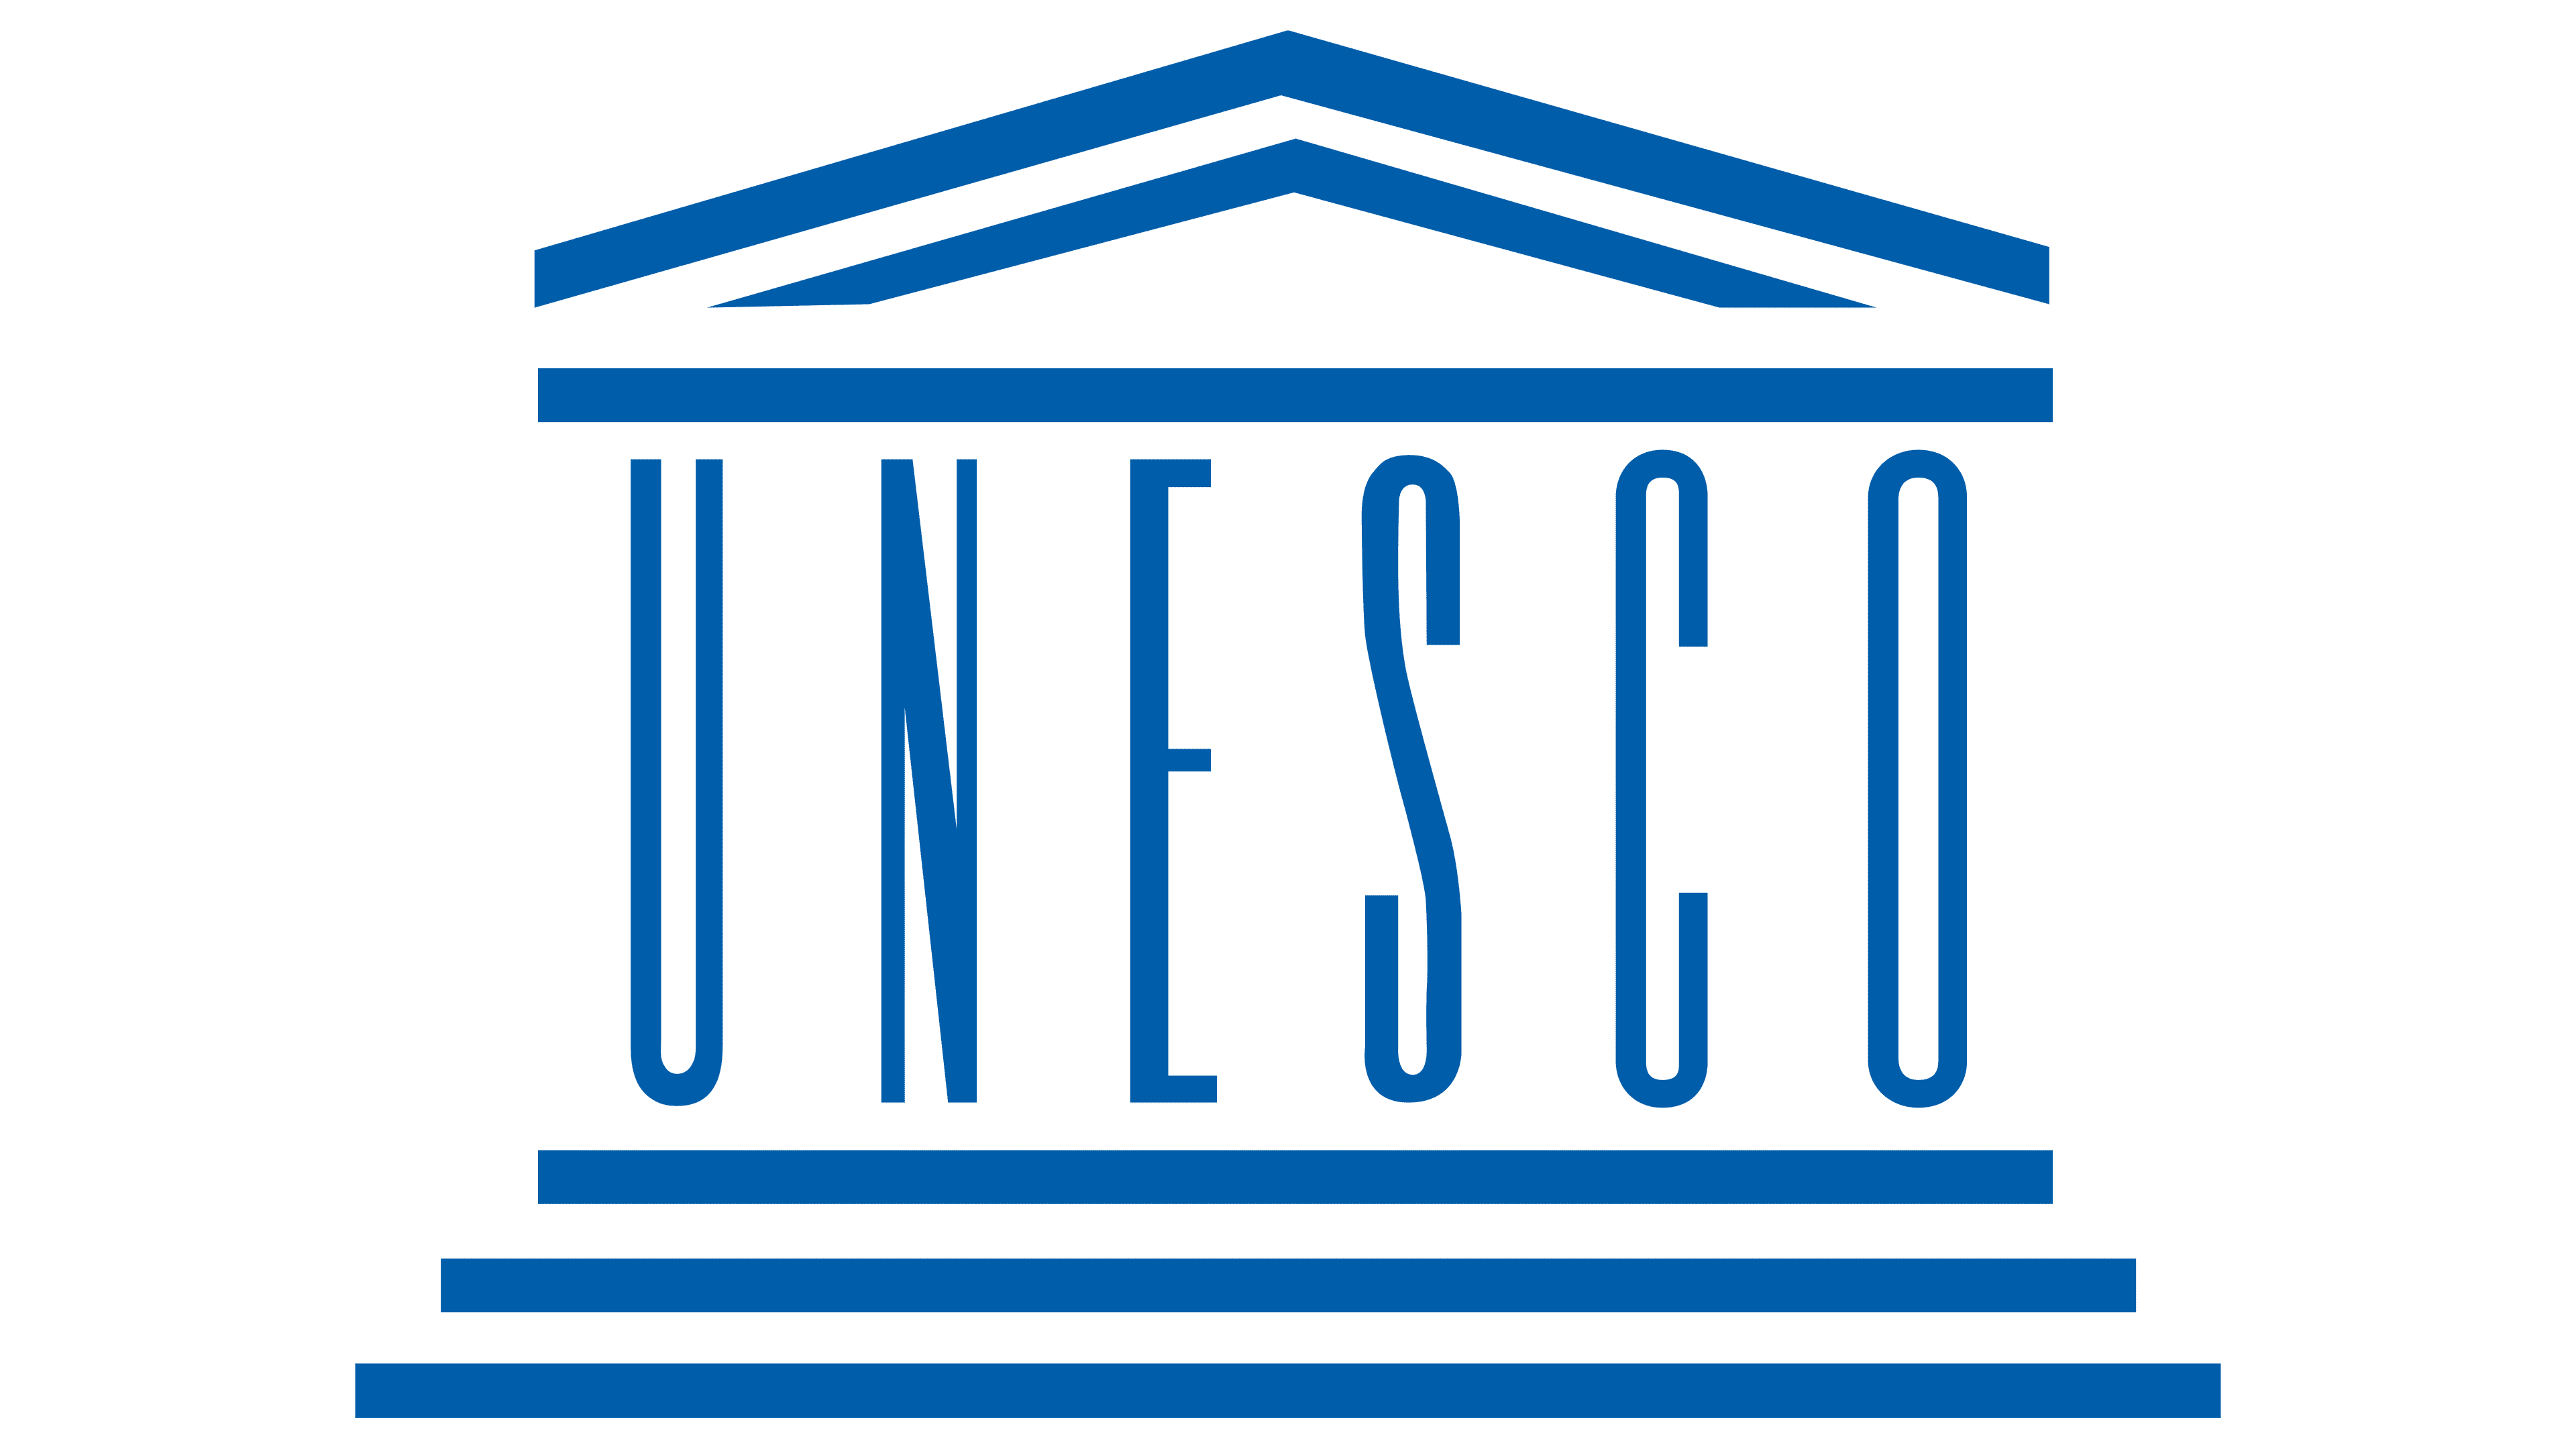 UNESCO Logo, symbol, meaning, history, PNG, brand